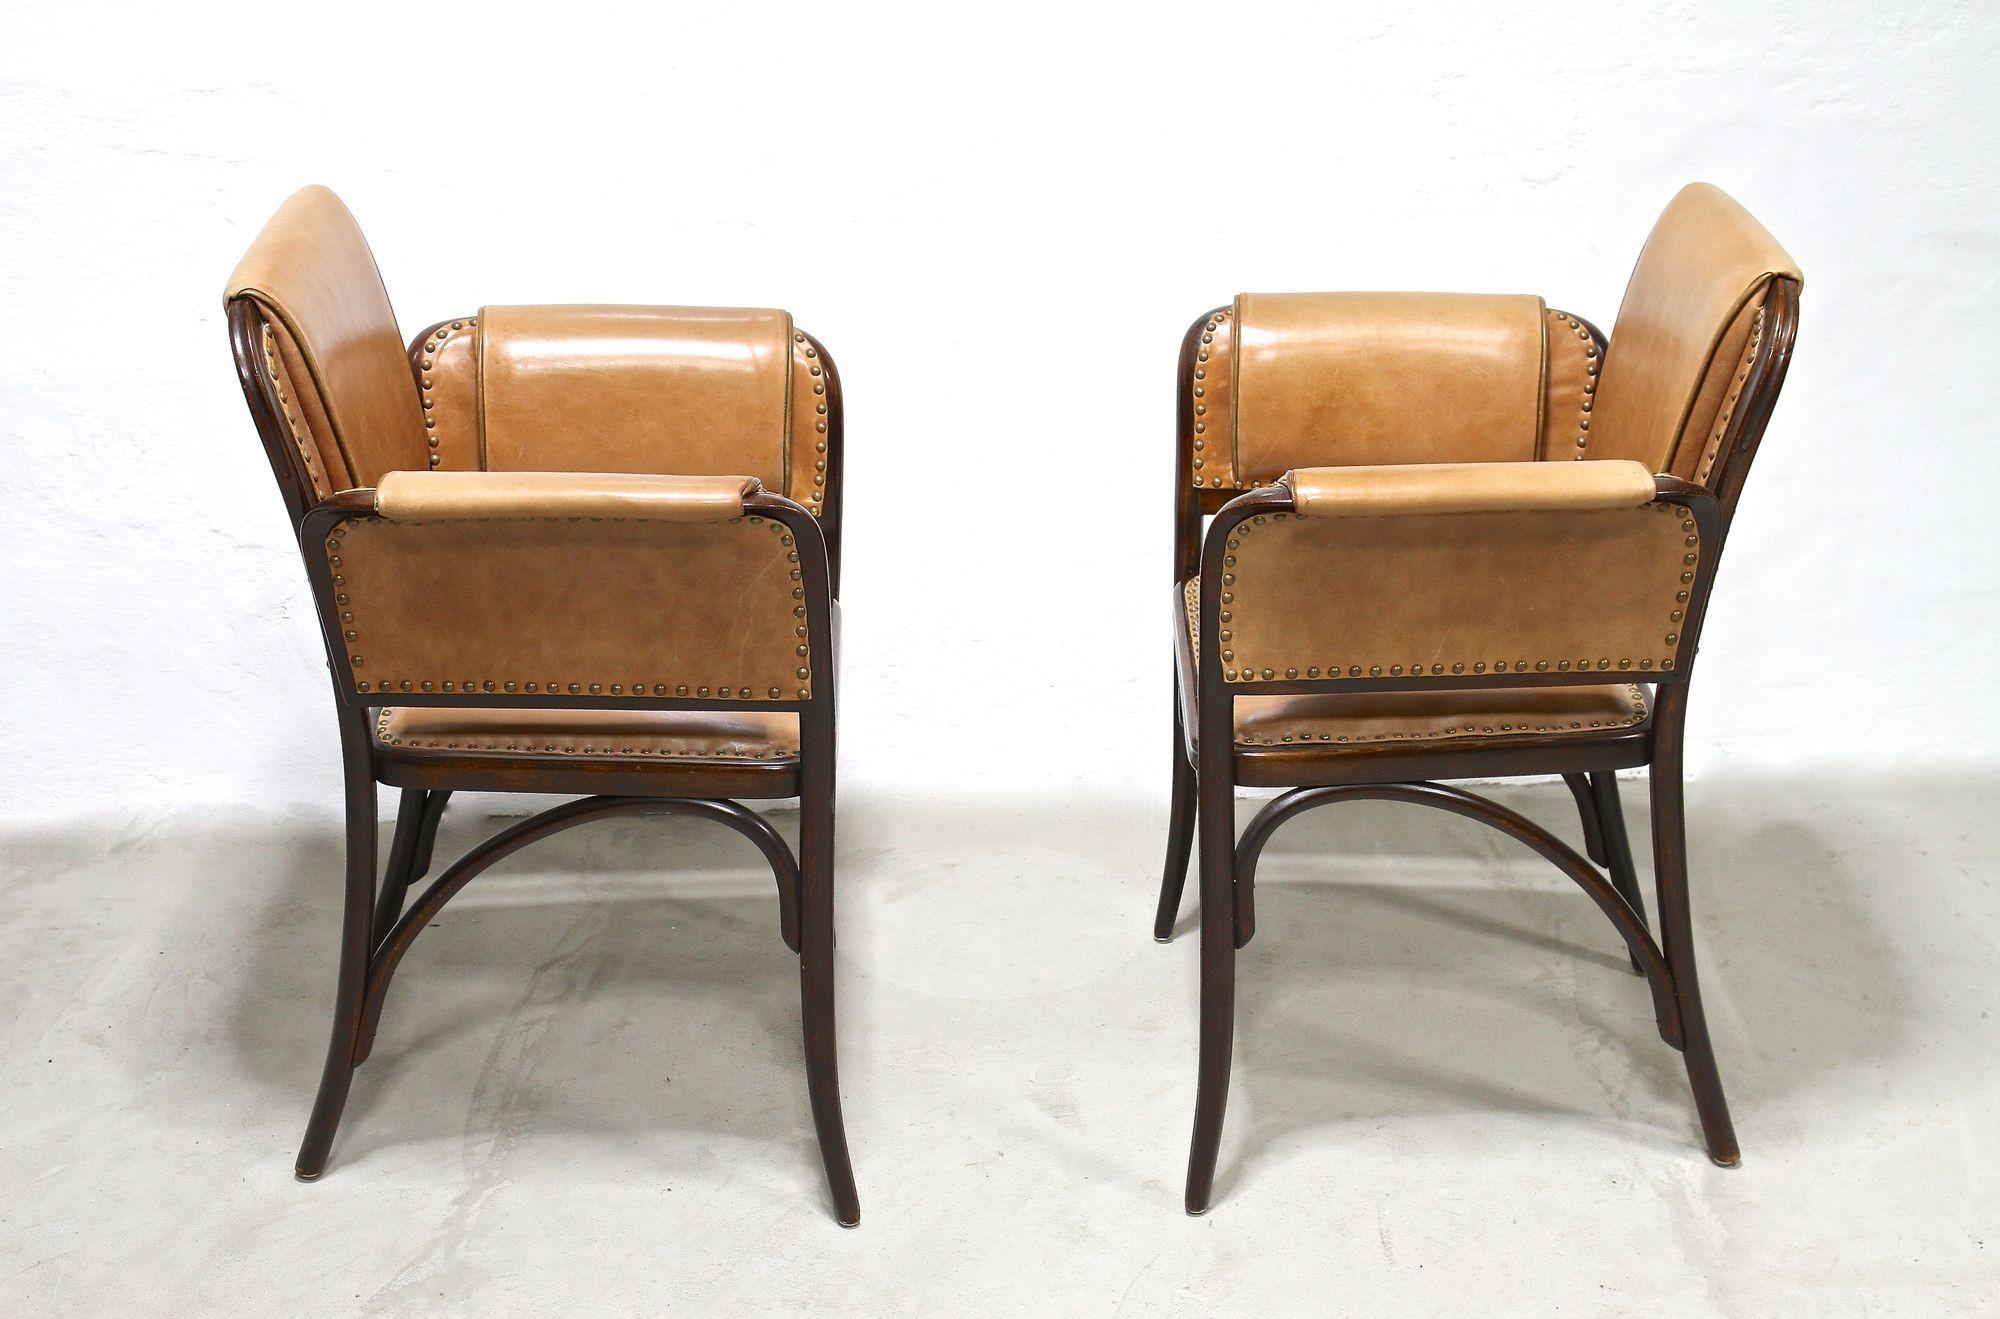 Pair of 20th Century Art Nouveau Bentwood Armchairs by Thonet, Austria, Ca. 1904 For Sale 4